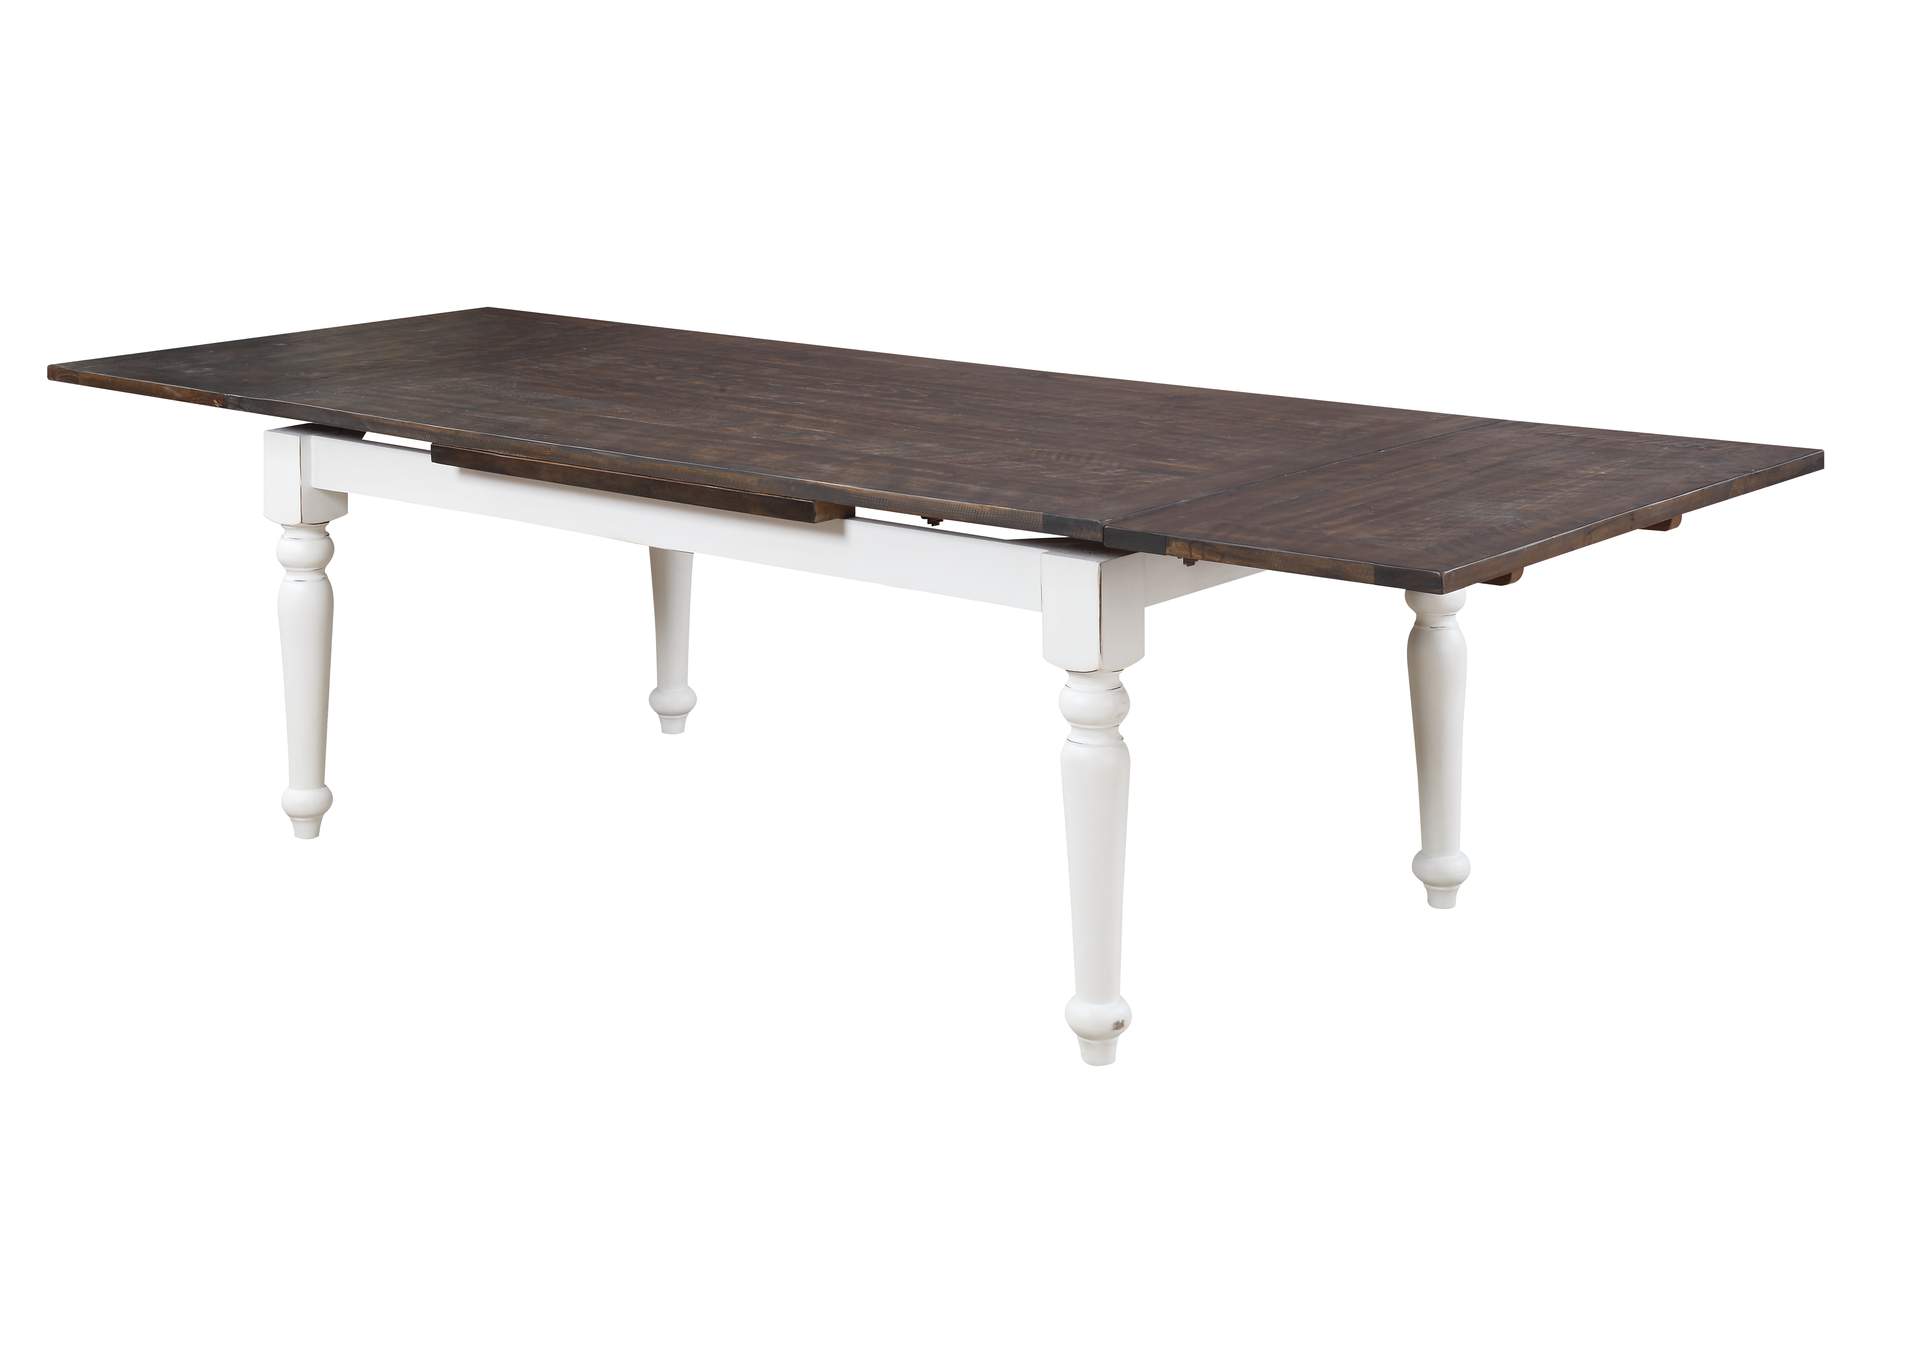 Mountain Retreat Dining Table - Leaves,Emerald Home Furnishings